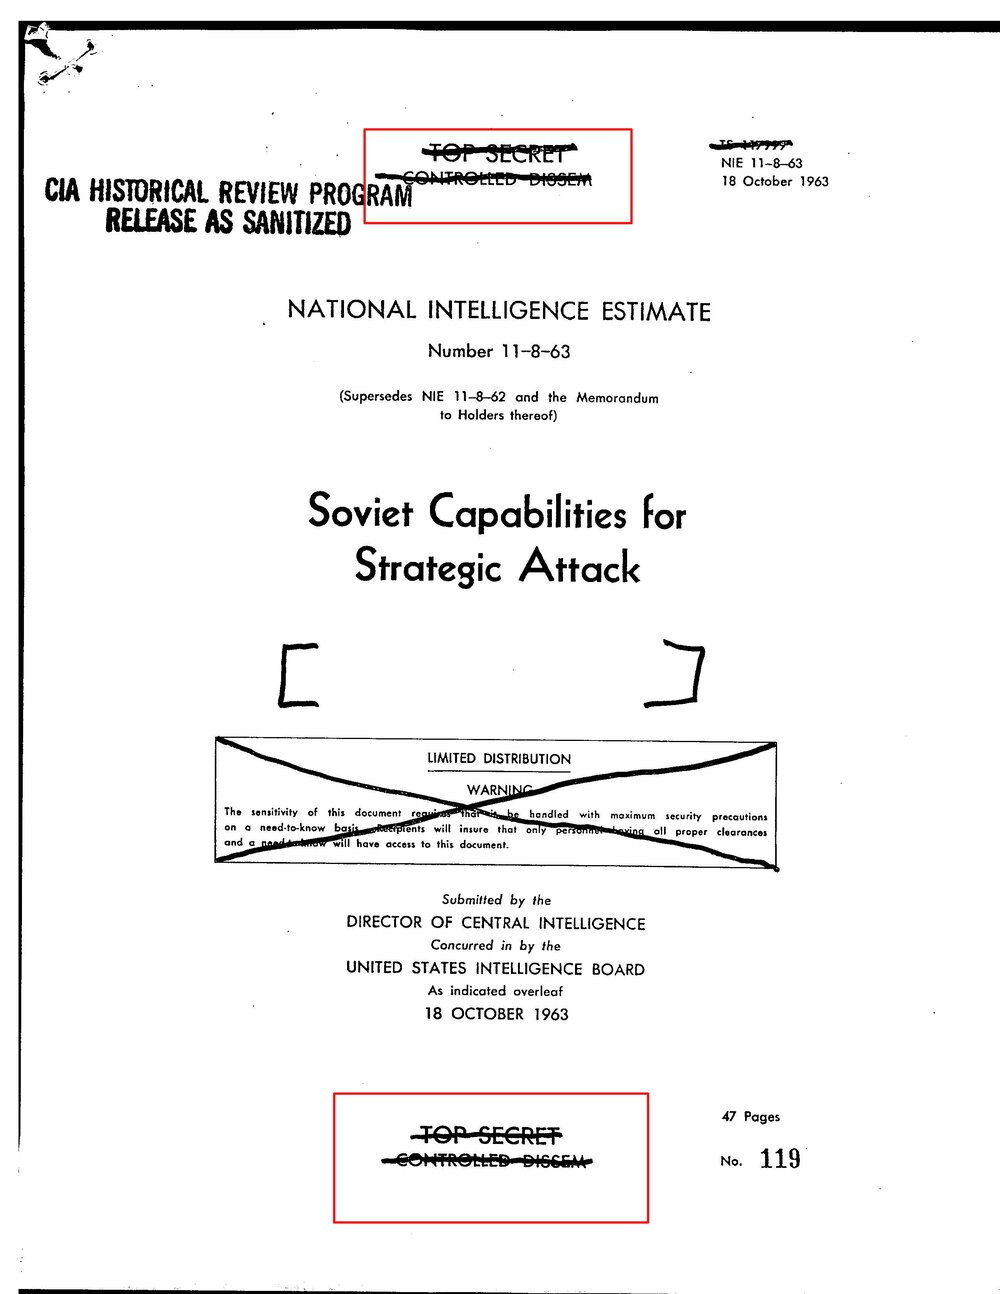 Soviet Capabilities for Strategic Attack RED (10-11-63)_Page_1.jpg